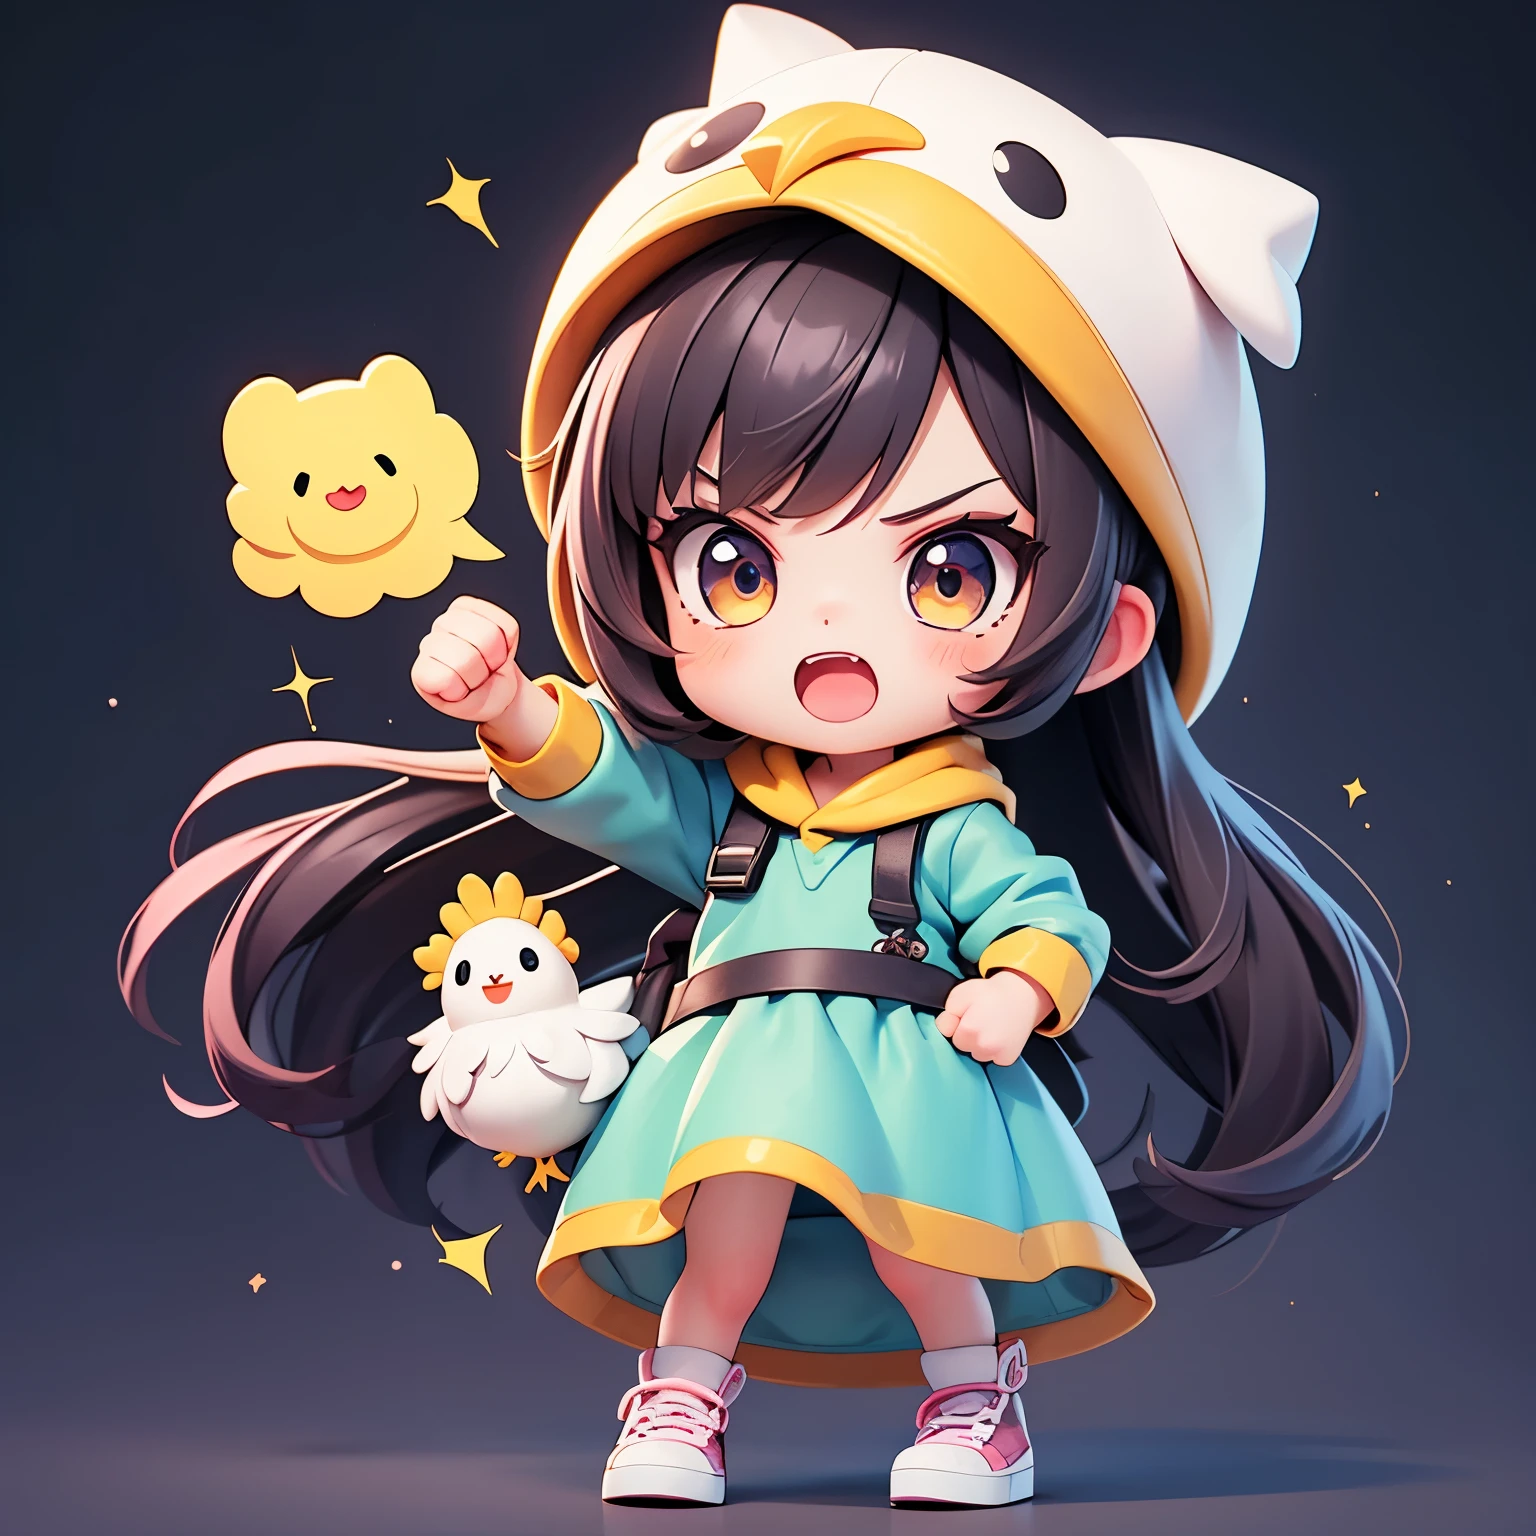 The character acted extremely angry.
The character raises his fist.
The character opens his mouth and shouts. , cartoon girl in a chicken costume with a hat and a hand,  kawaii cutest sticker ever, cute digital art, chibi girl, cute anime style, cute detailed digital art, anime chibi, cute anime girl, chibi anime girl, ruan cute vtuber, sticker illustration